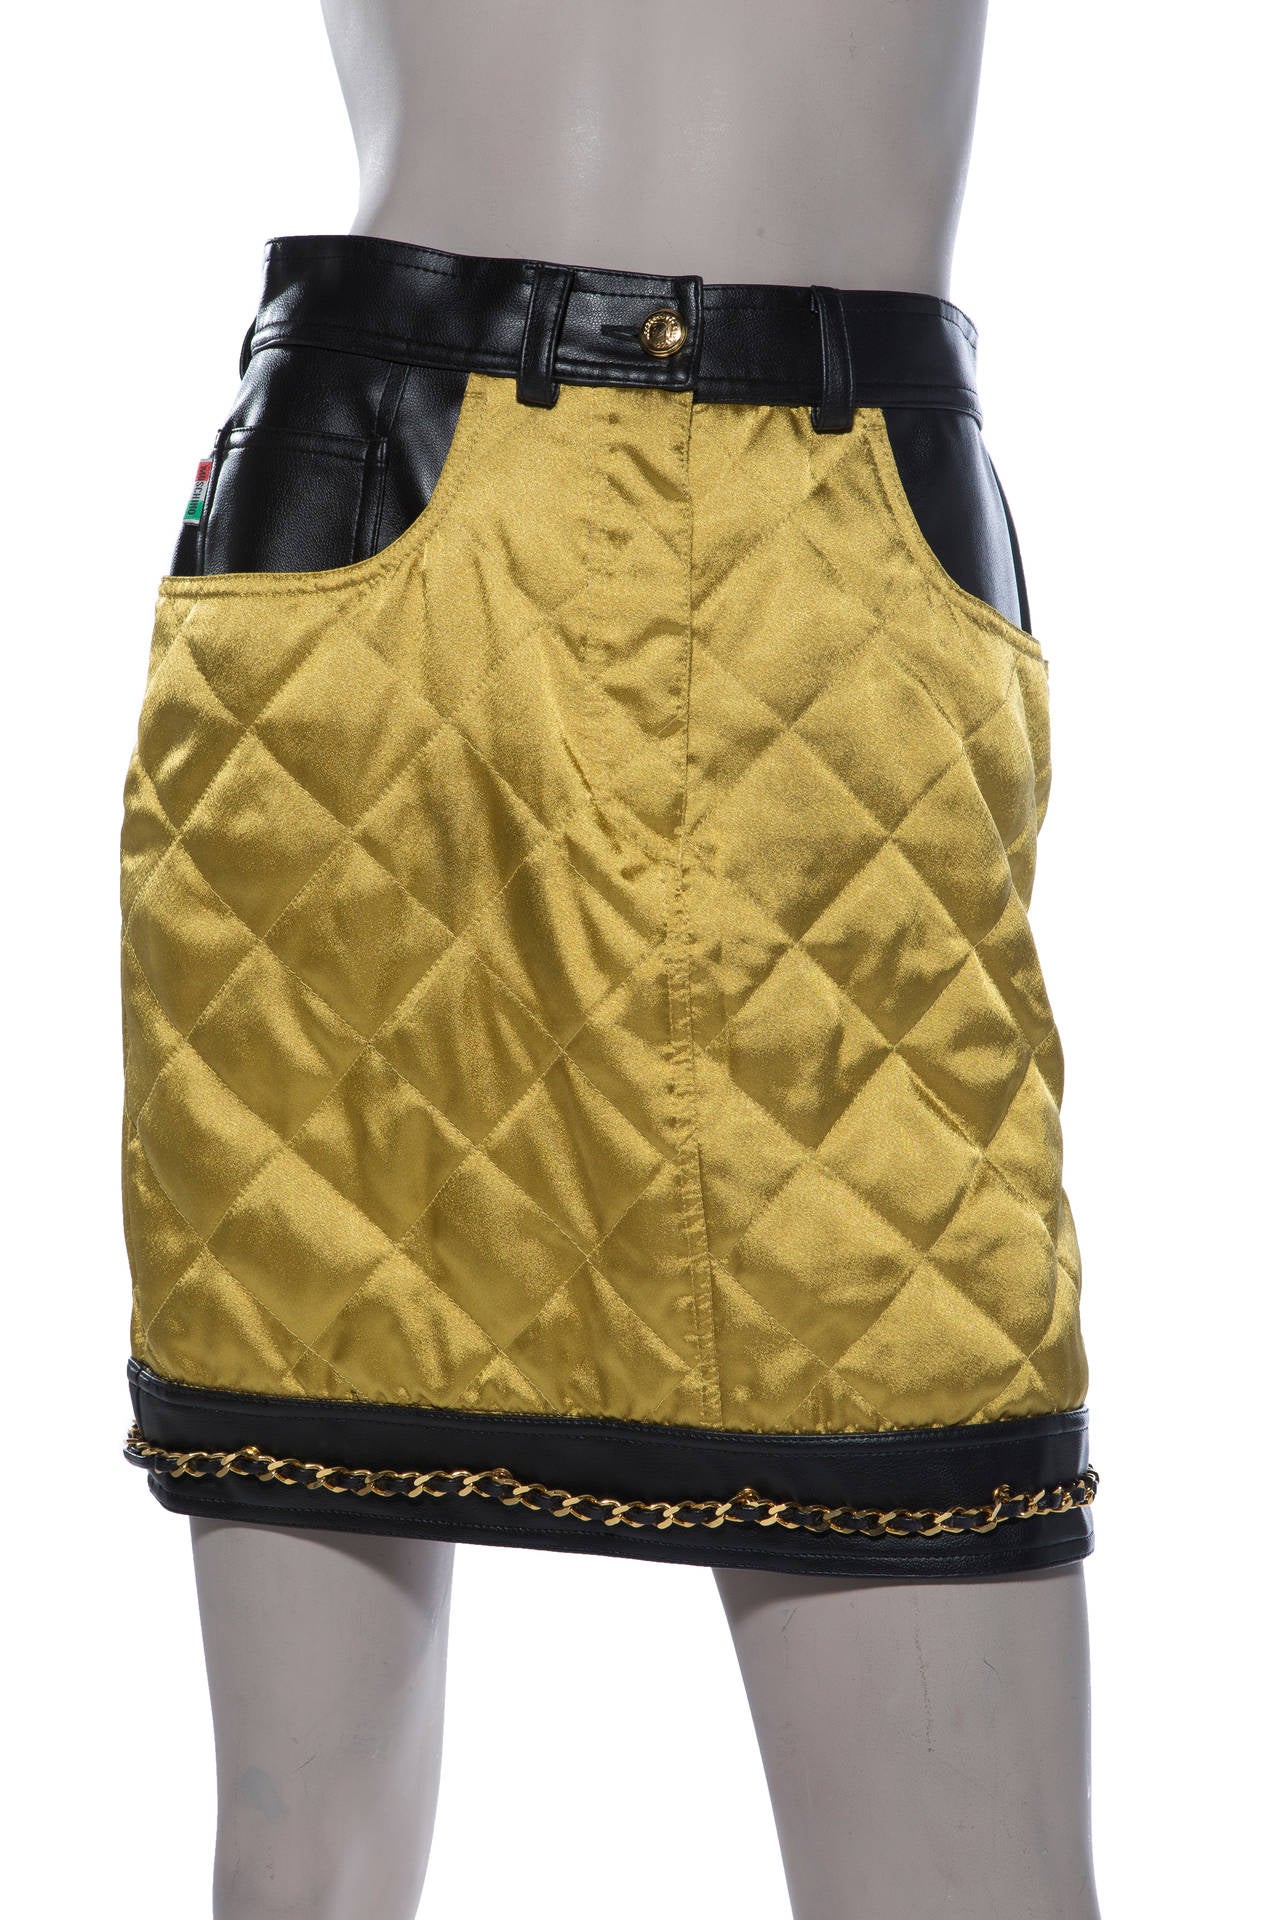 Moschino gold quilted satin skirt with black leather trim,chain detail and fully lined.